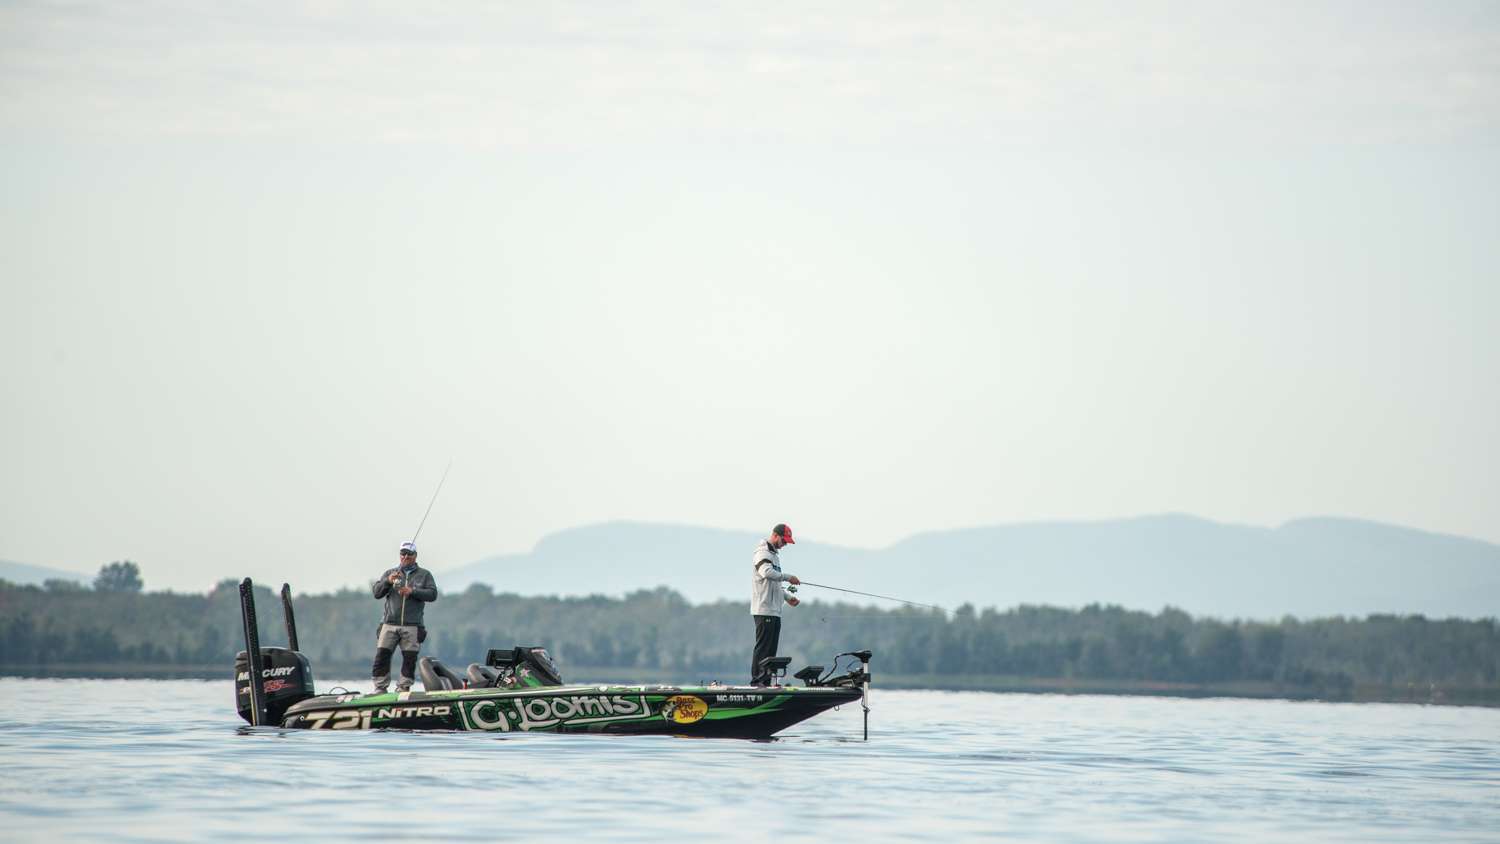 Carnright was spot hopping and making drops on different areas as he went. As we moved from one to another we passed Elite pro Jonathon VanDam. 